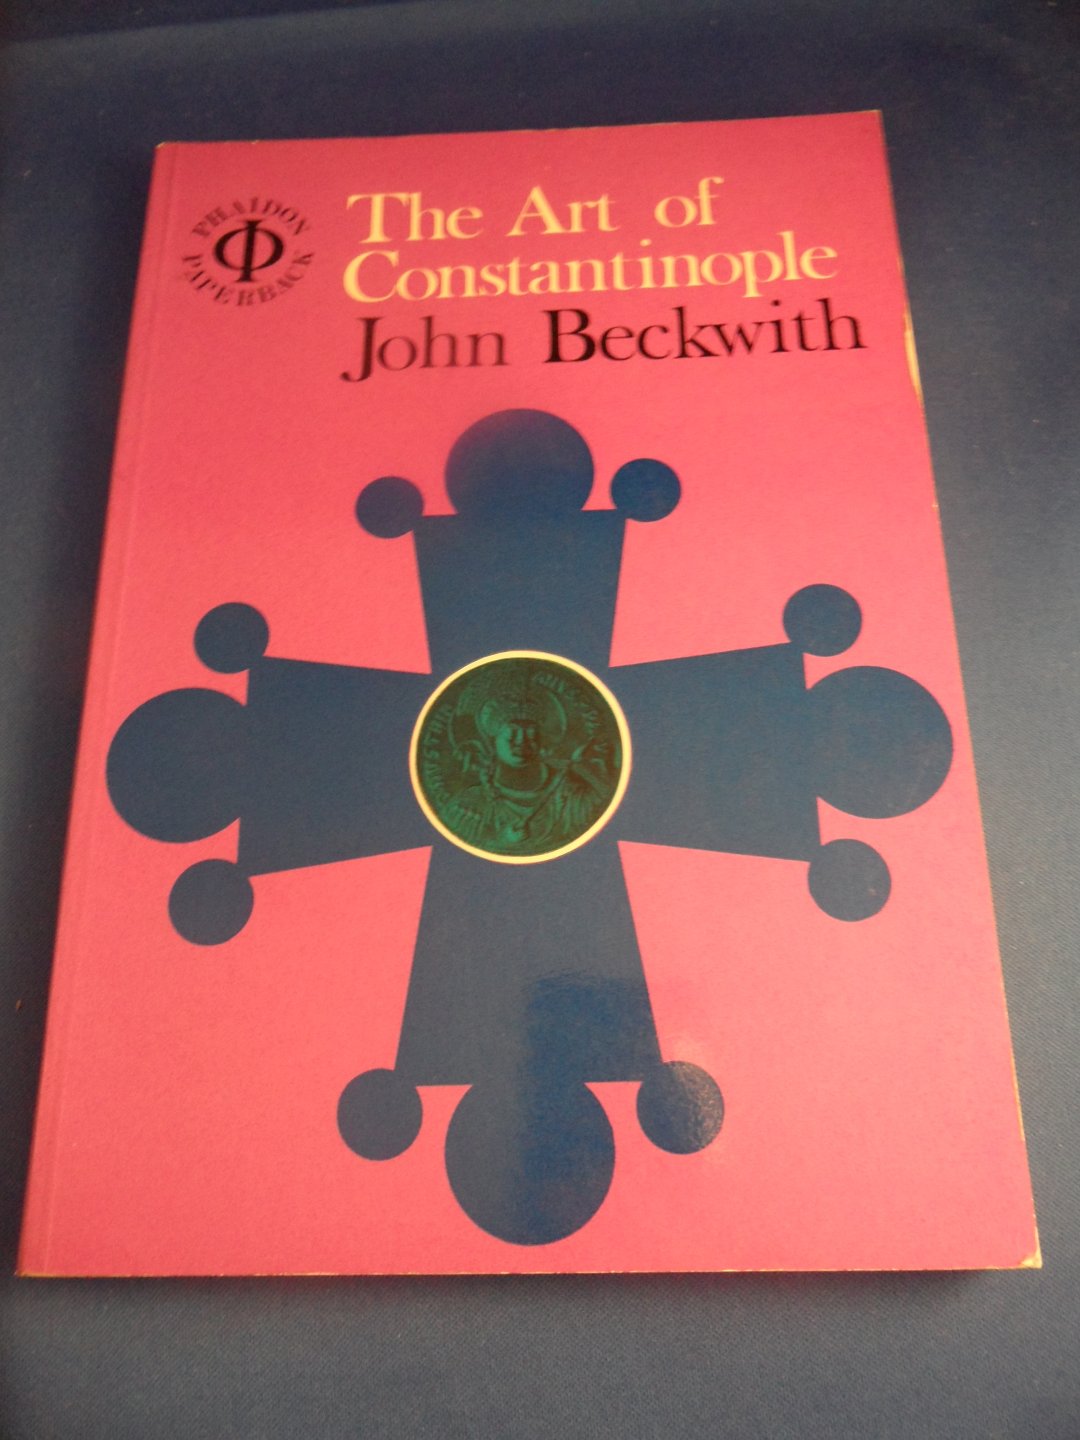 Beckwith, John - The art of Constantinople. An introduction of byzantine art 330 - 1453